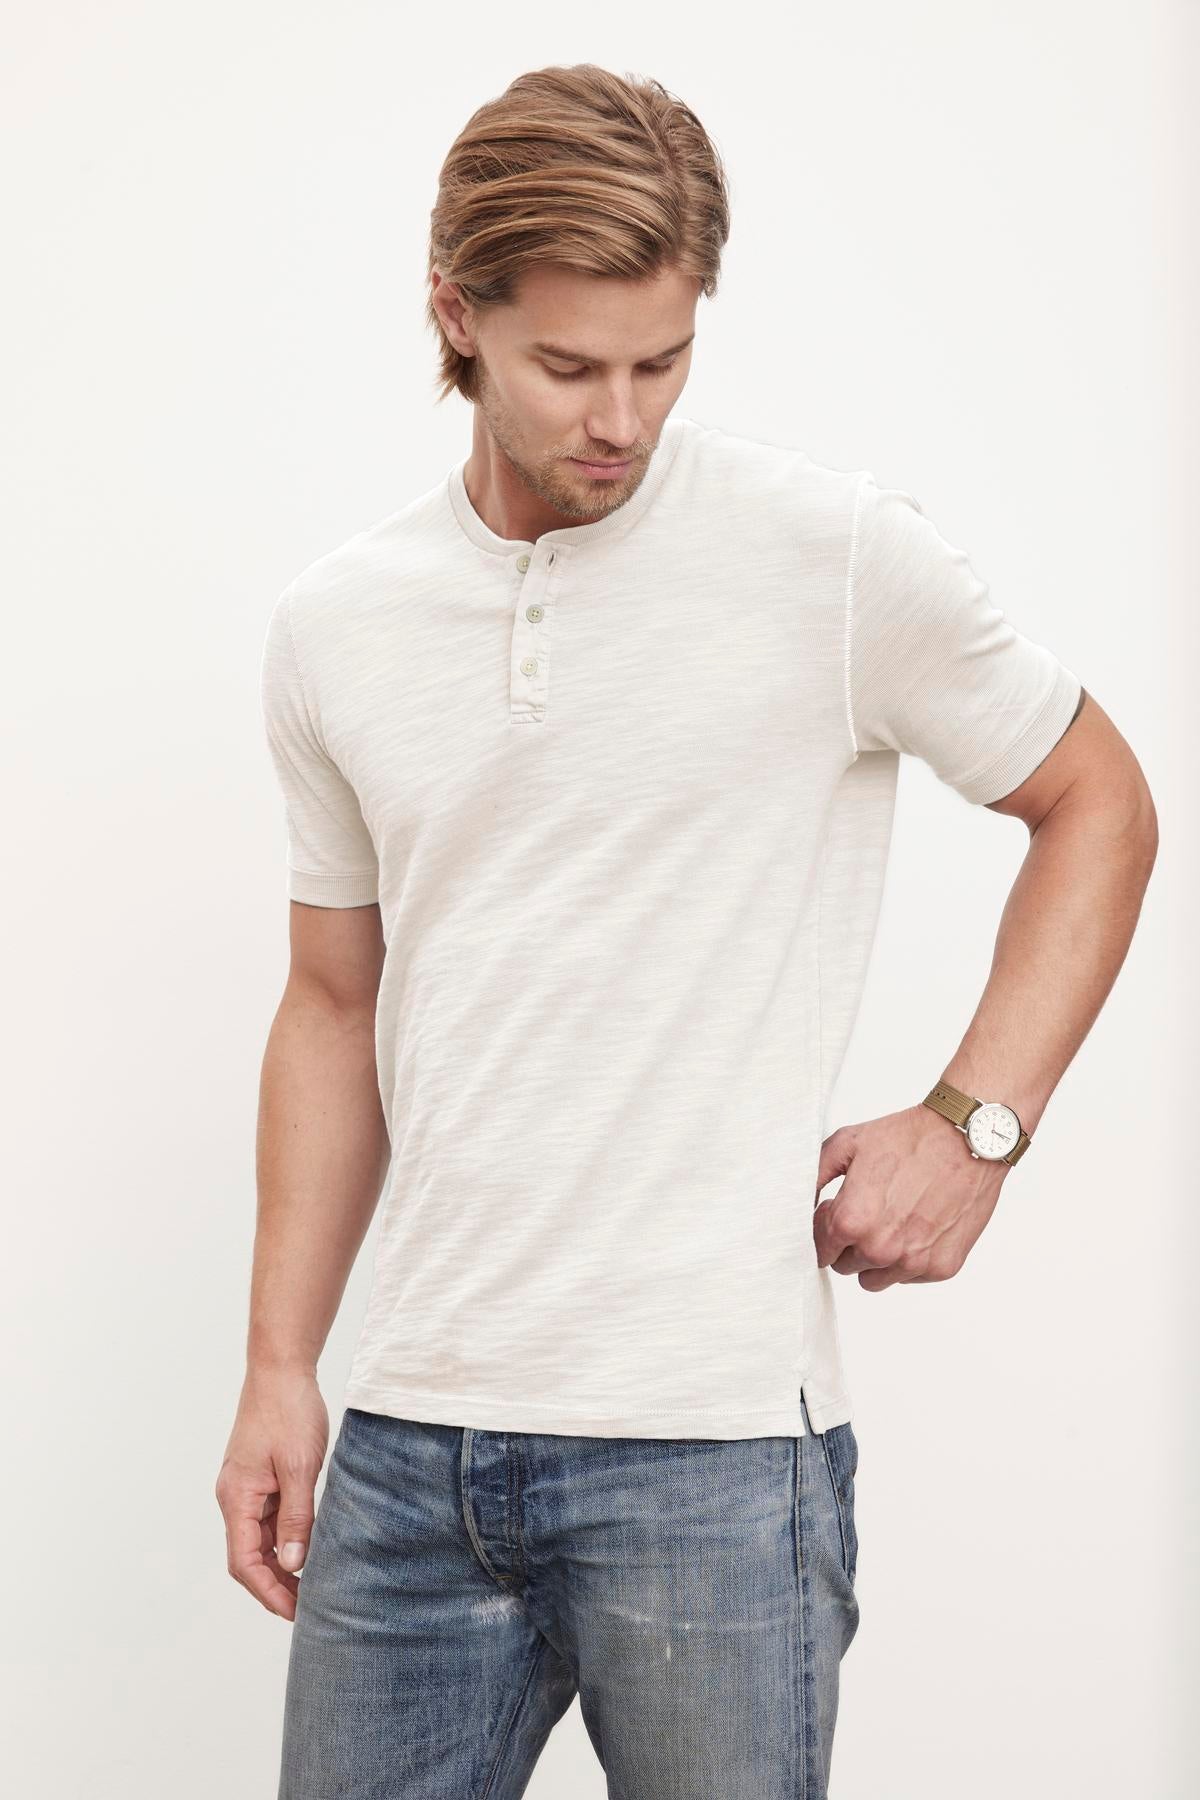 A man wearing jeans and a white Velvet by Graham & Spencer VITO HENLEY shirt.-36009082192065